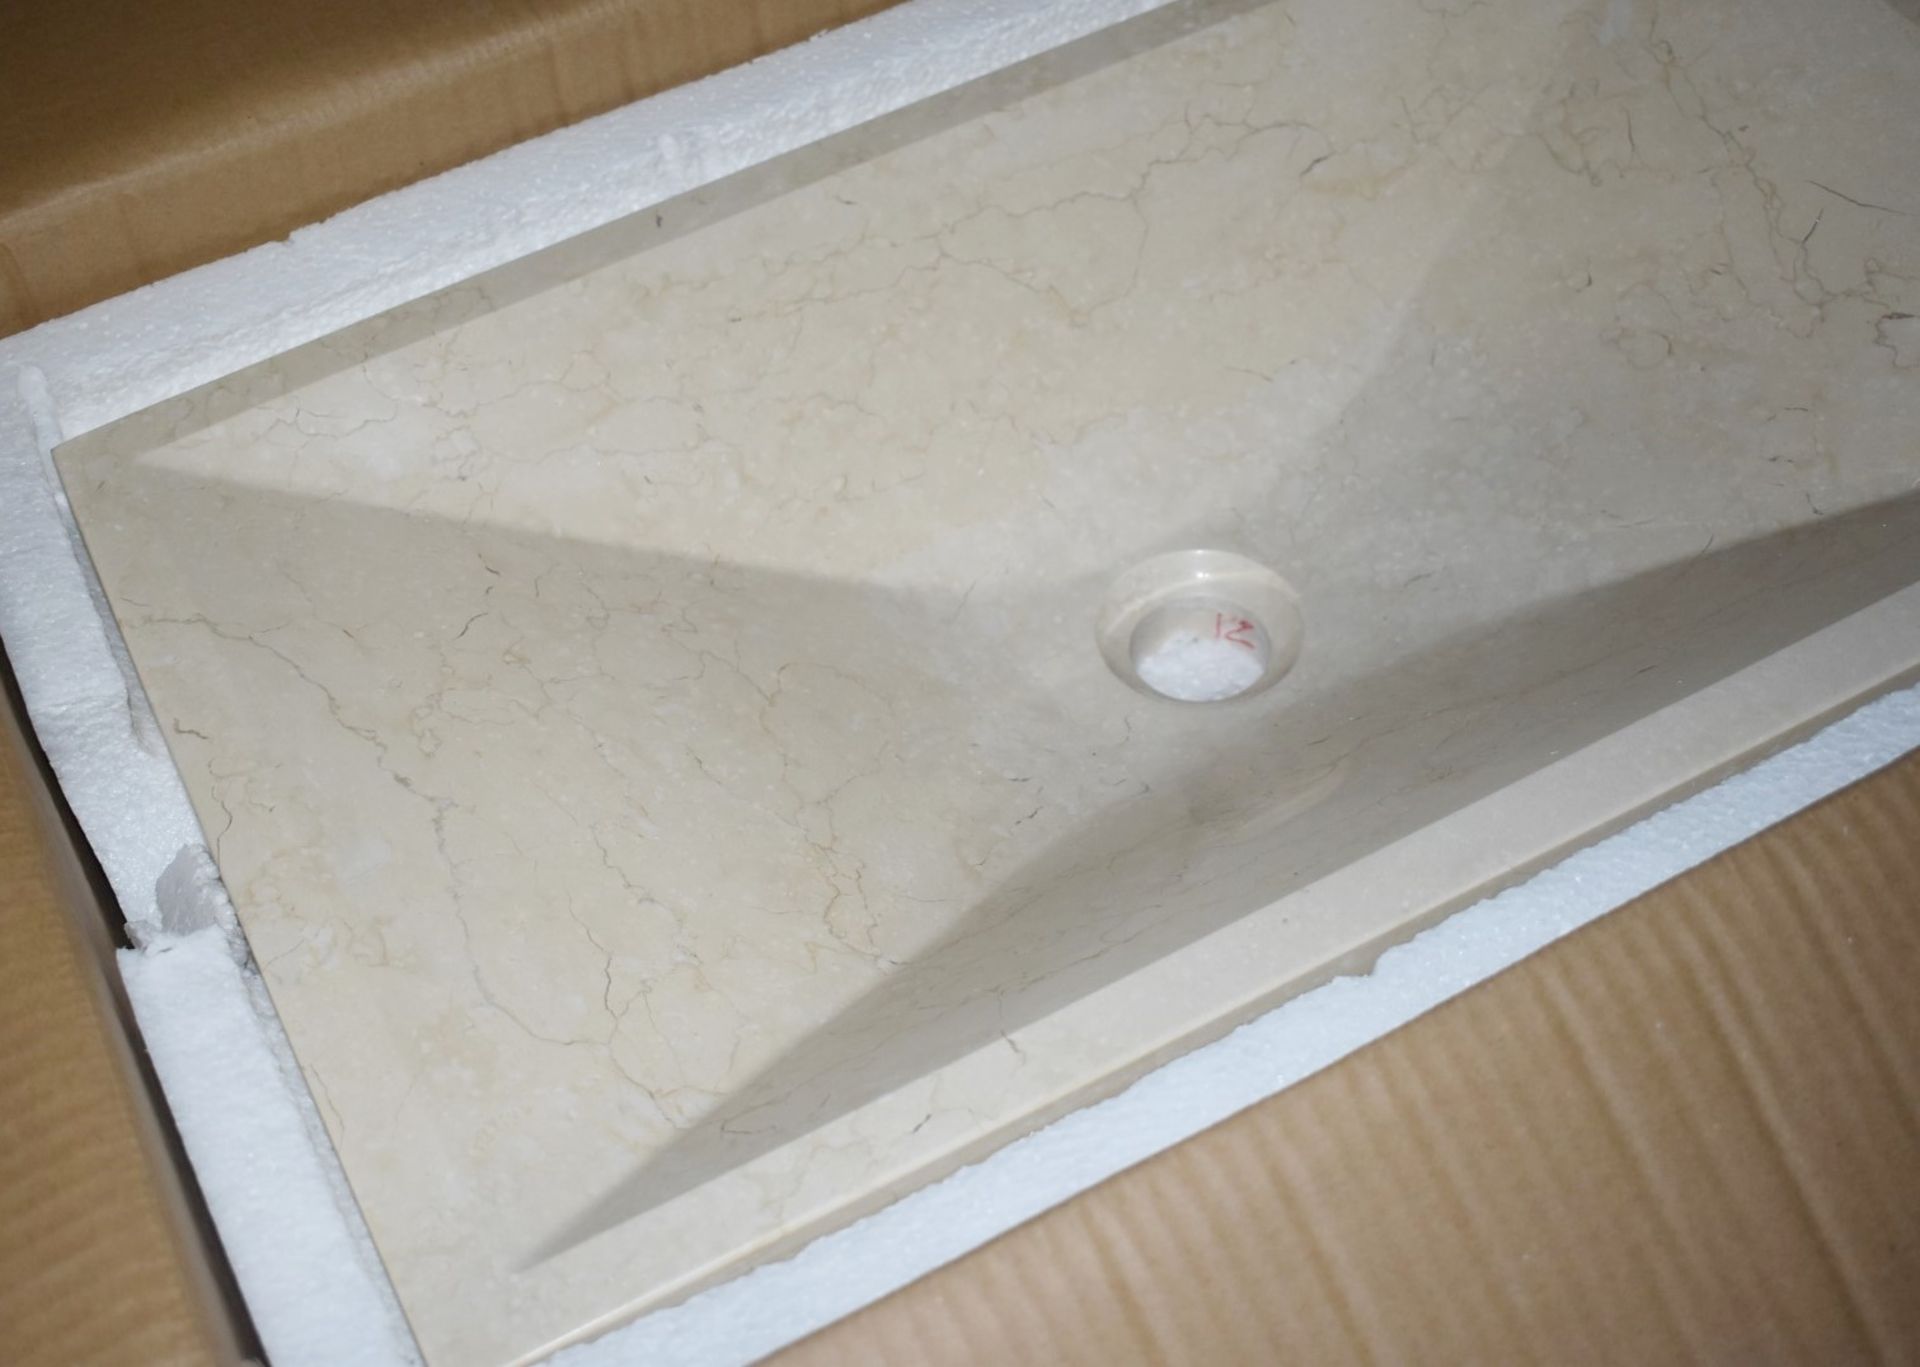 1 x Stonearth 'Karo' Solid Galala Marble Stone Countertop Sink Basin - New Boxed Stock - RRP £ - Image 8 of 8